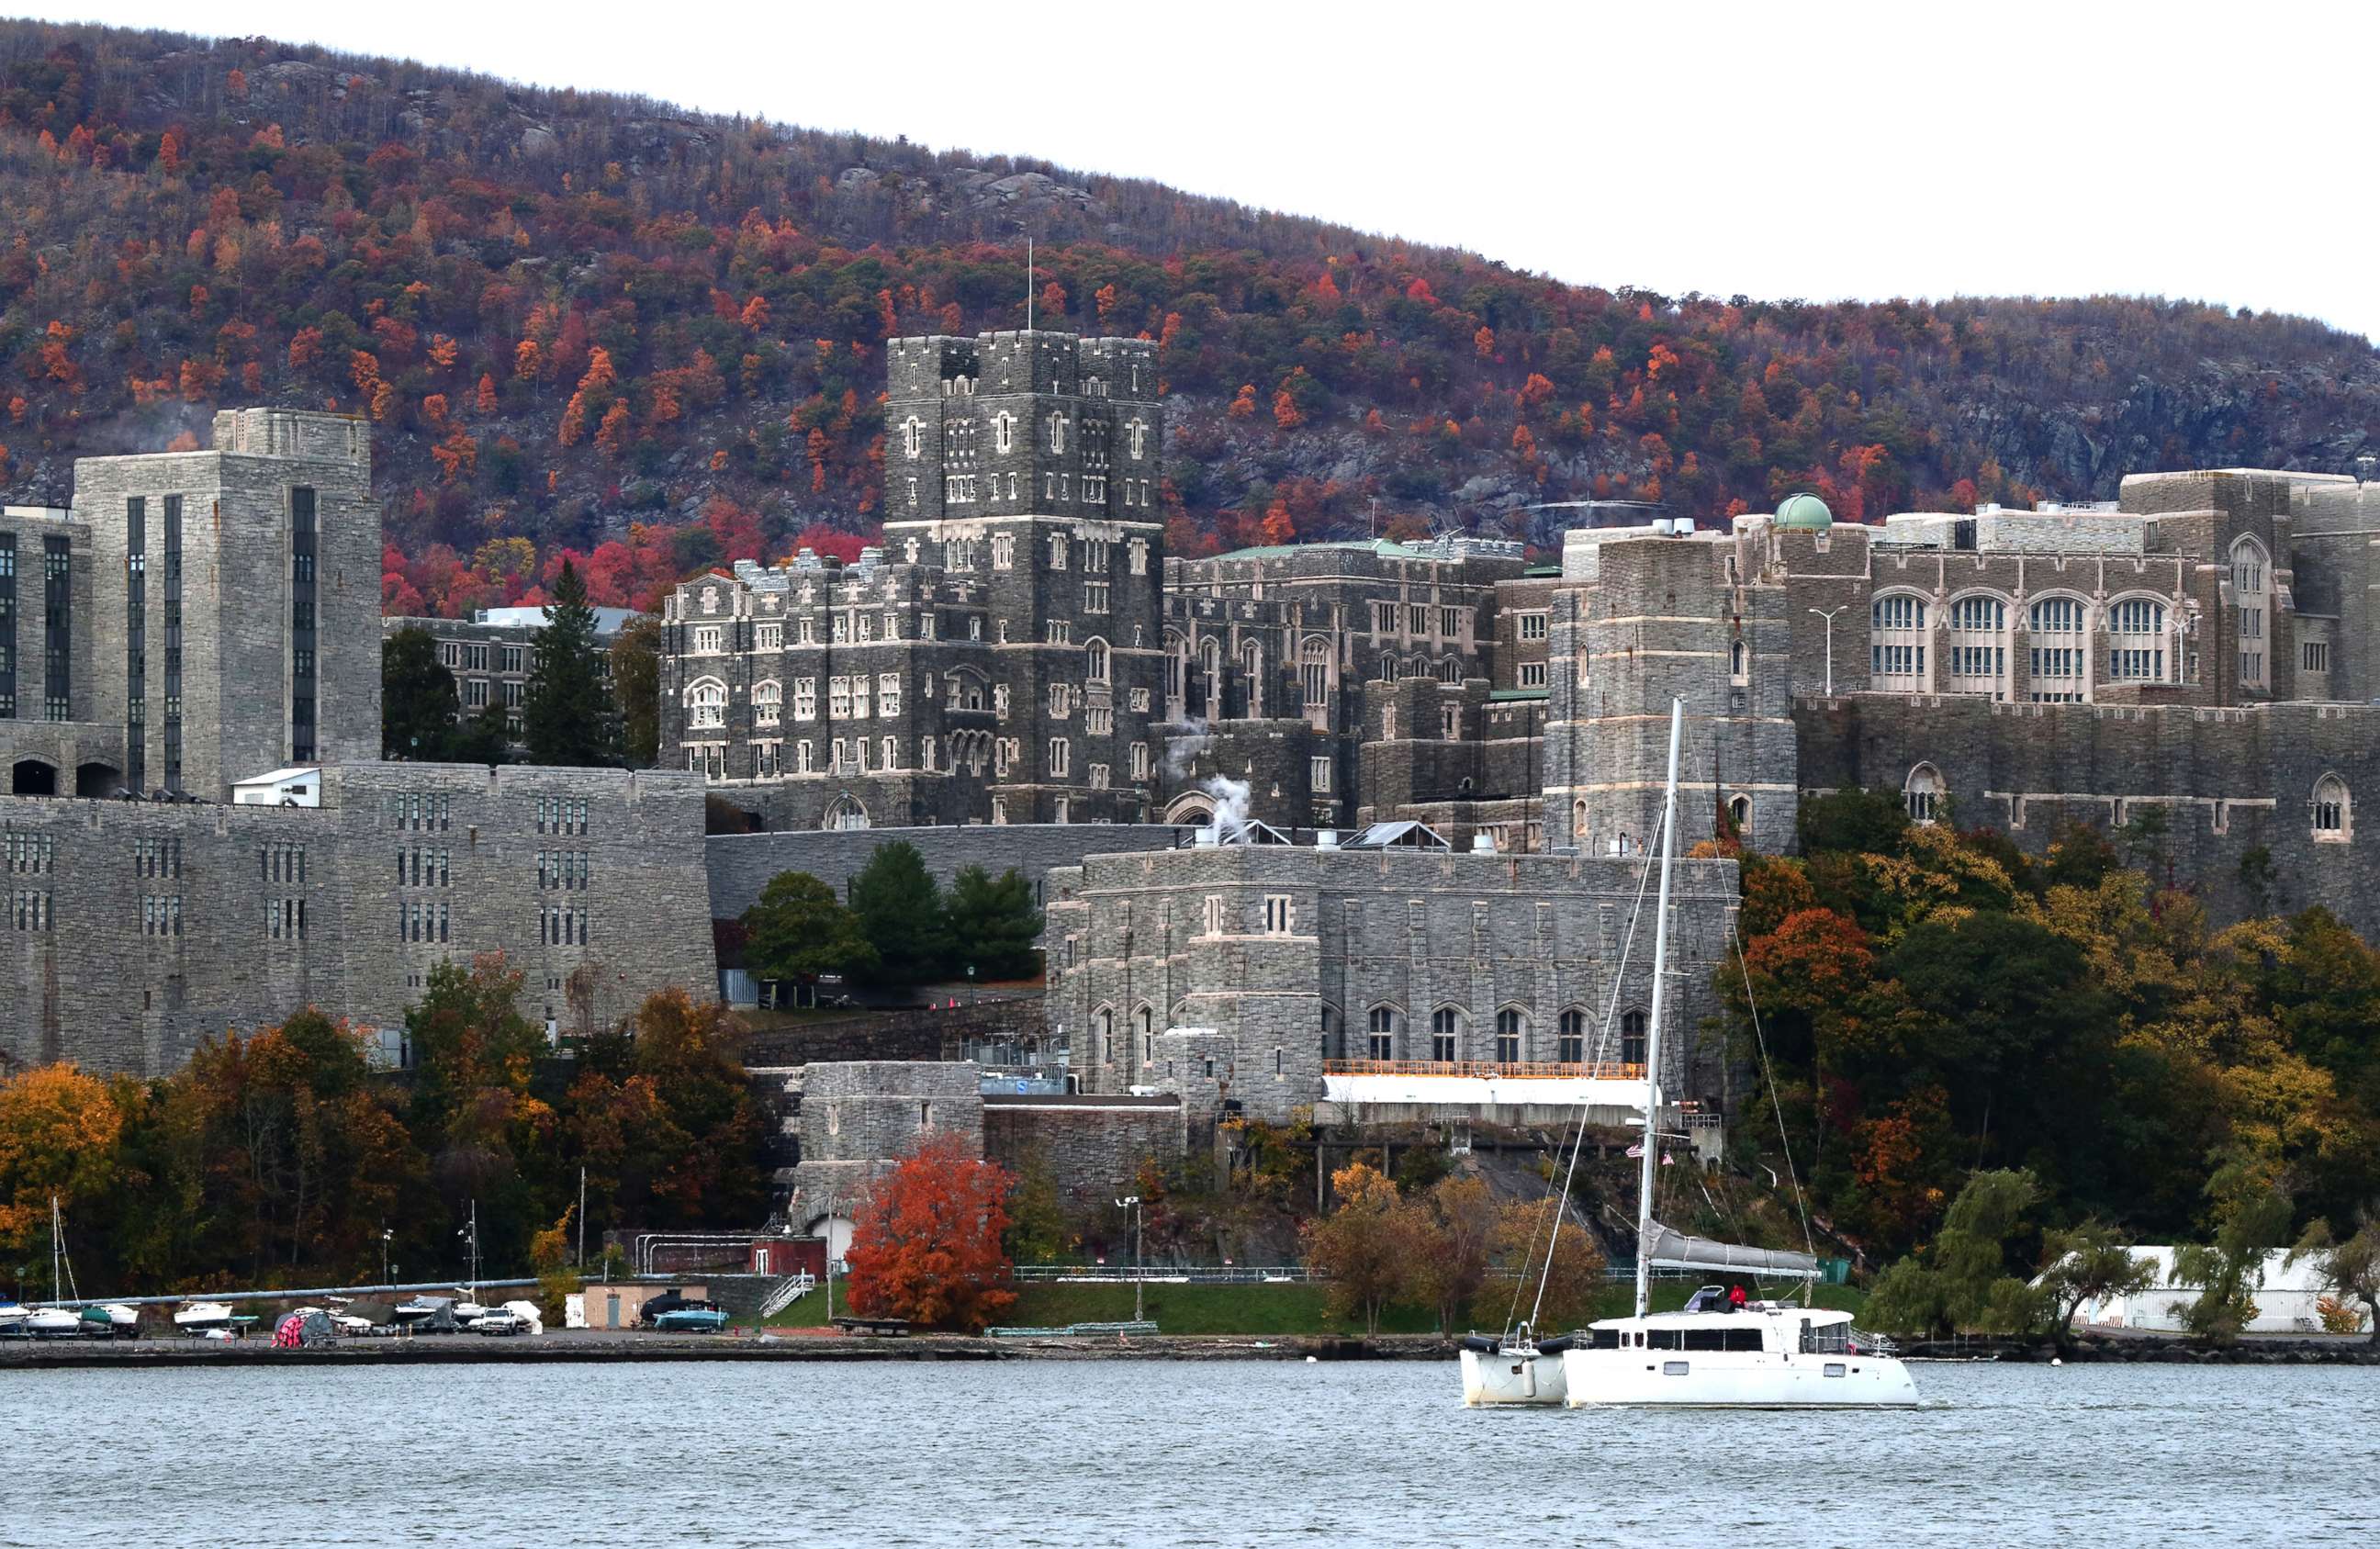 PHOTO: A boat sails in the Hudson River in front of the United States Military Academy, West Point, Oct. 25, 2020, as seen from Garrison, N.Y.